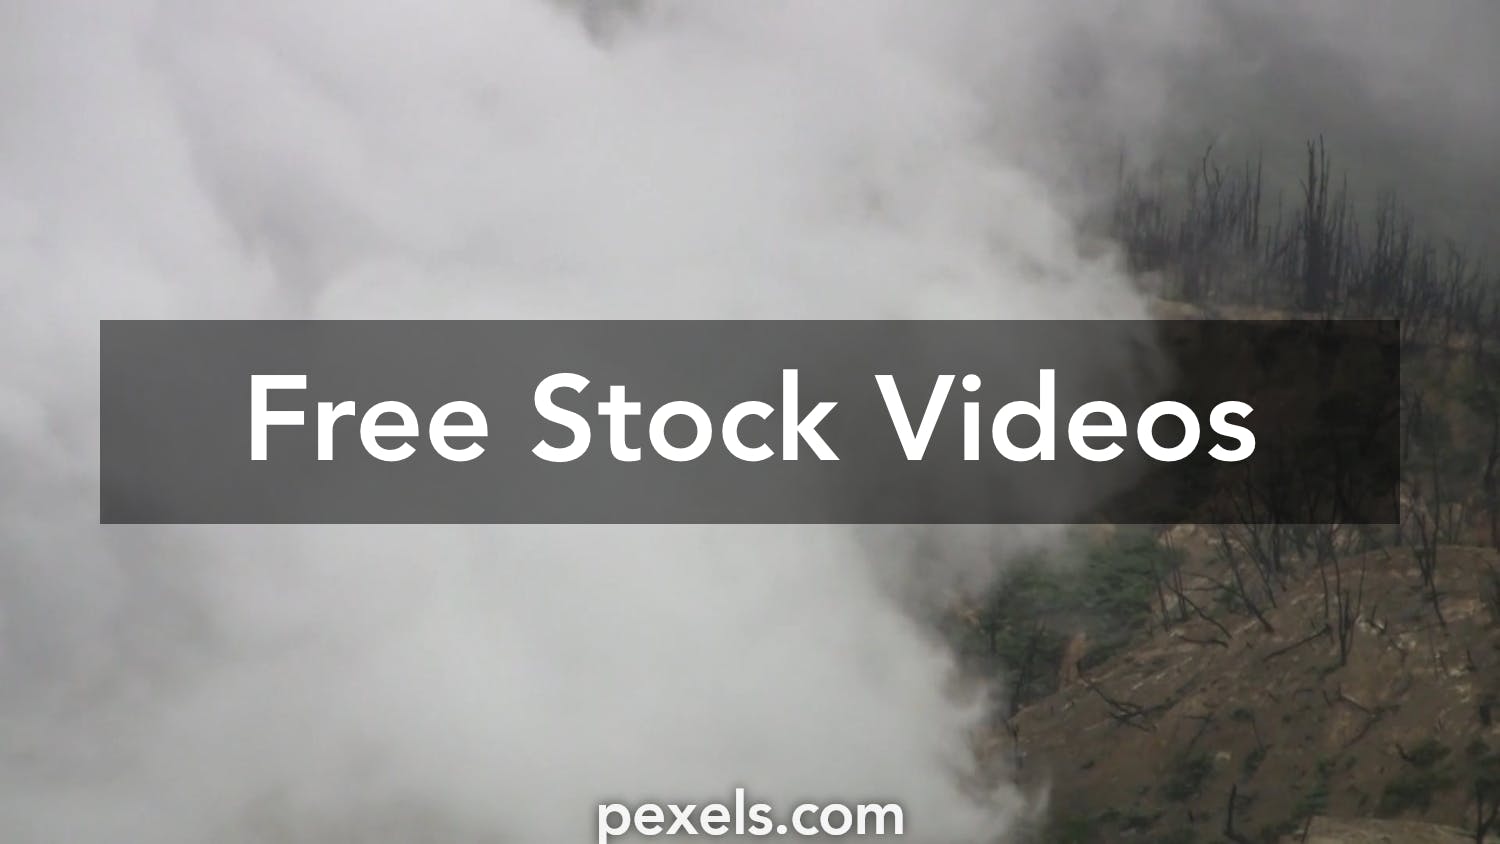 1000+ Engaging Forest Fire Videos · Pexels · Free Stock Videos